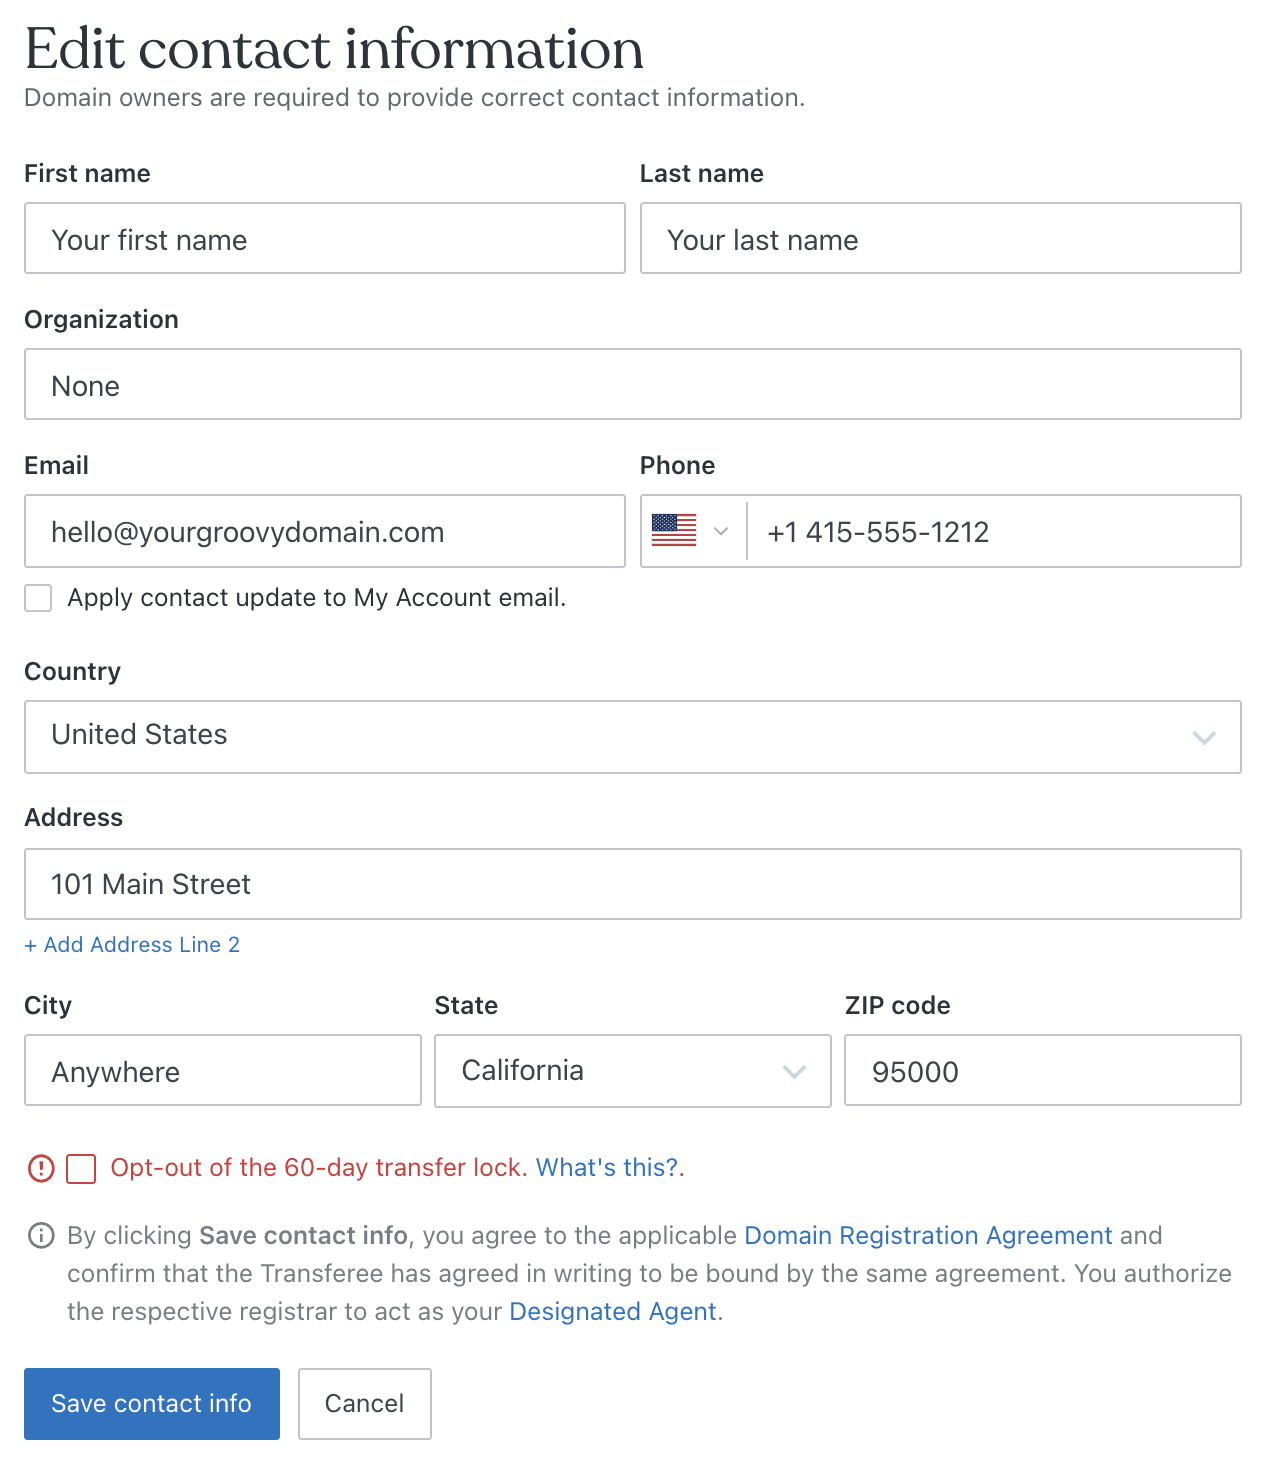 The Edit contact information screen allows you to input your name, organization, email, phone number, and physical address, as well as to opt out of the 60-day transfer lock.